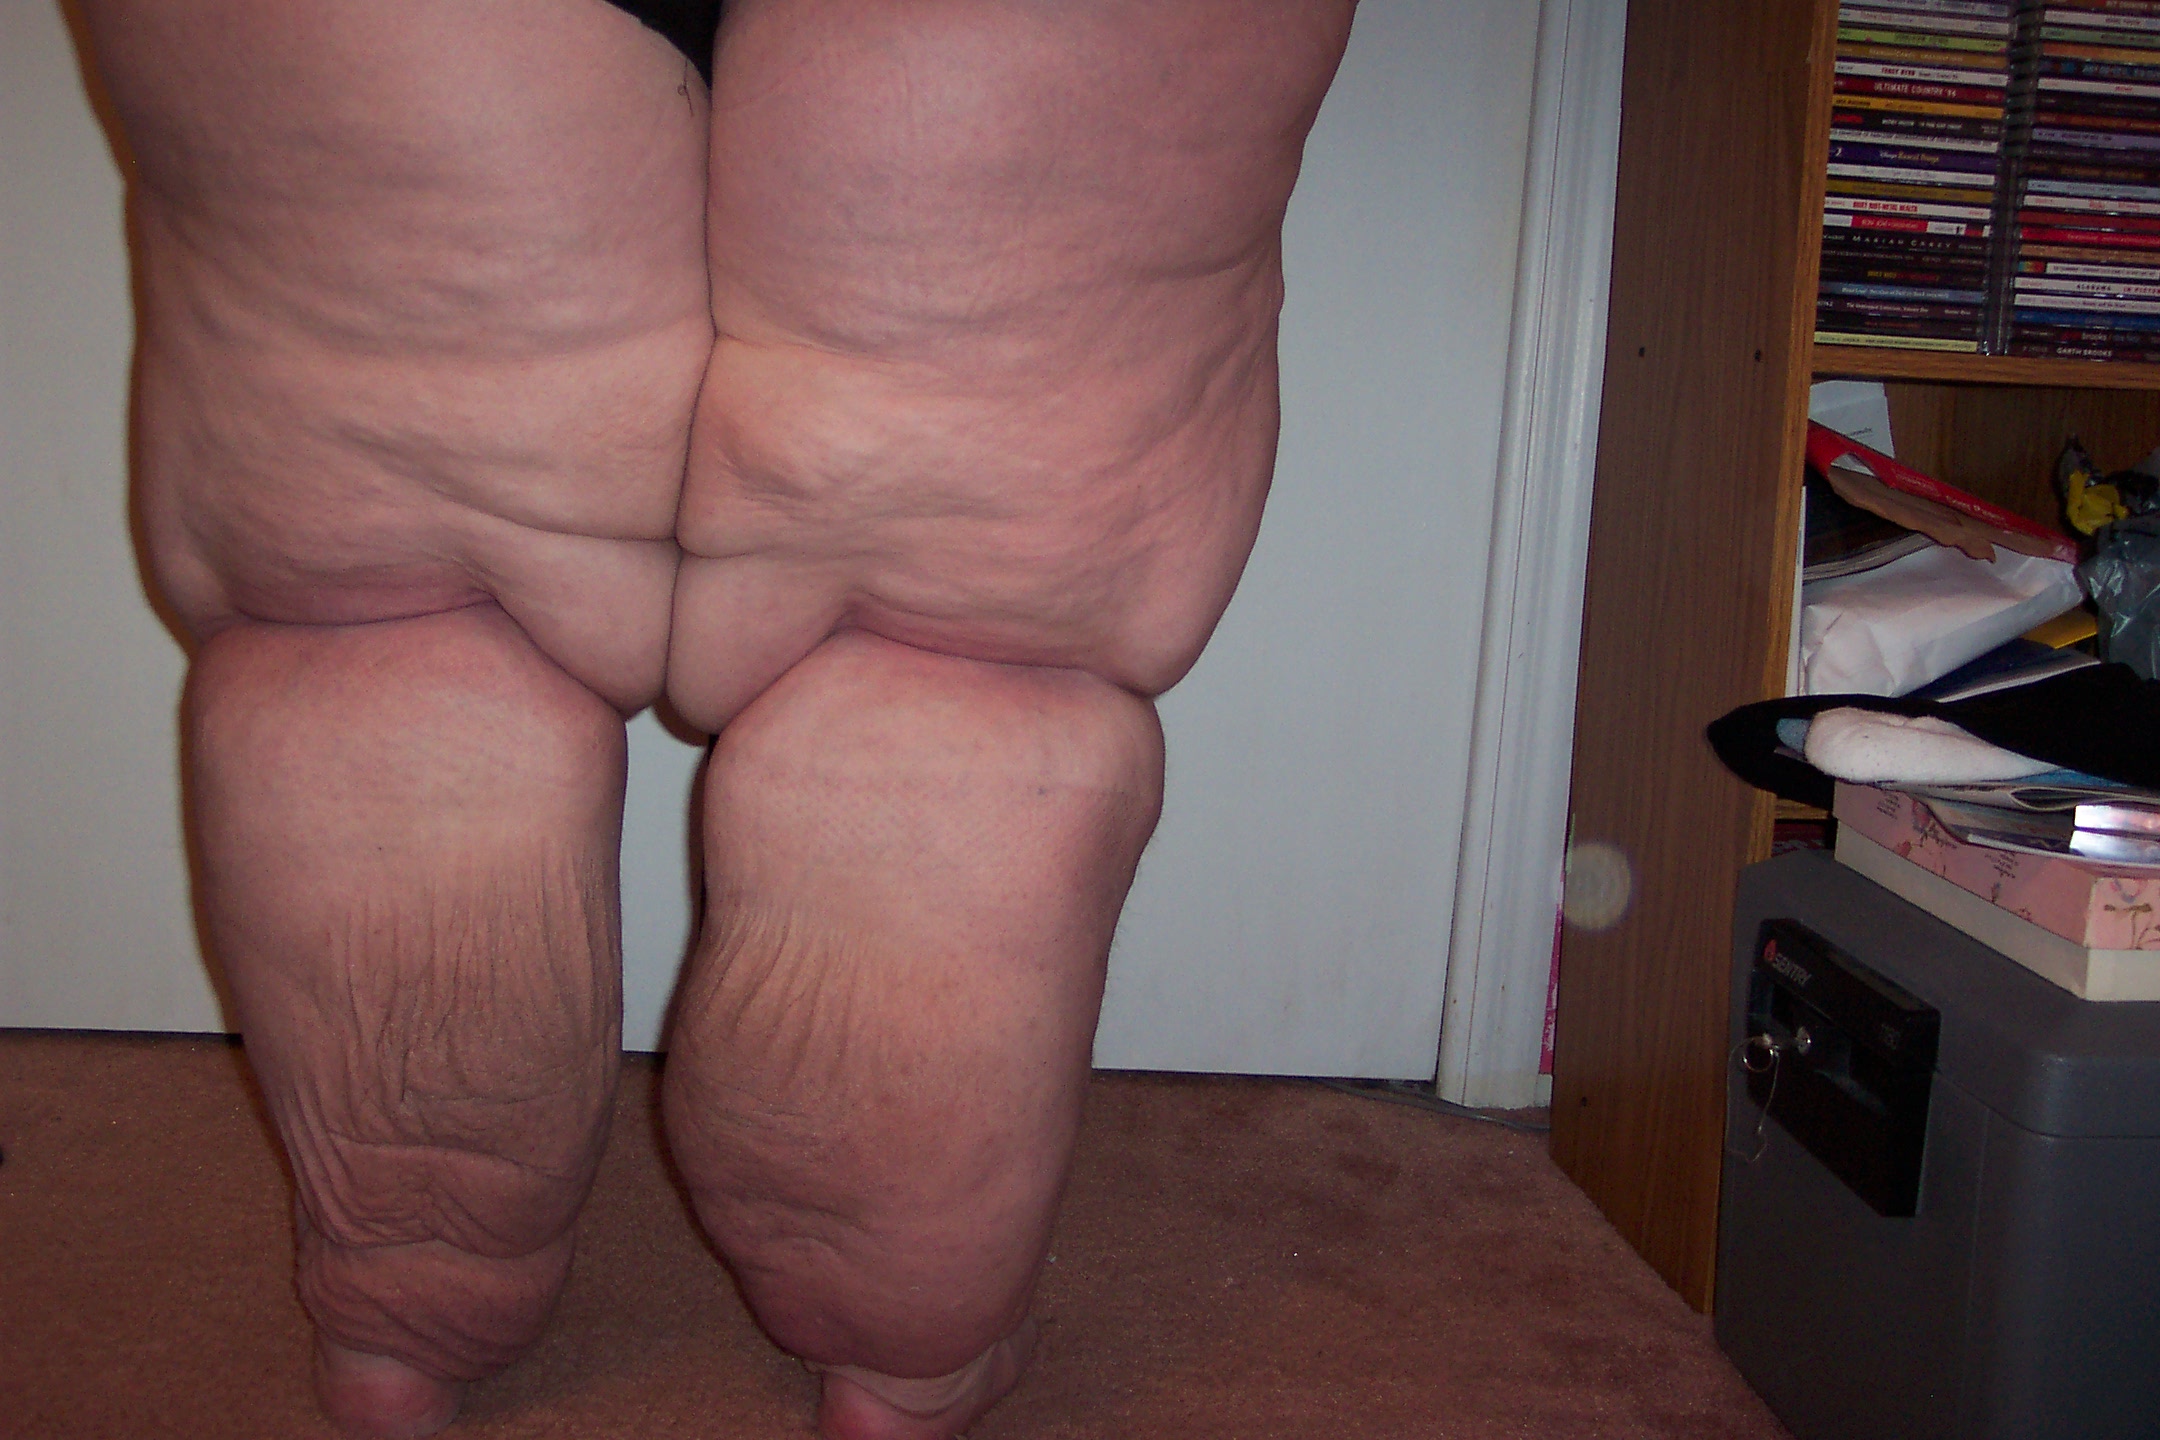 Stage 3 lymphedema back view after treatments, 65 pounds lost in 14 days